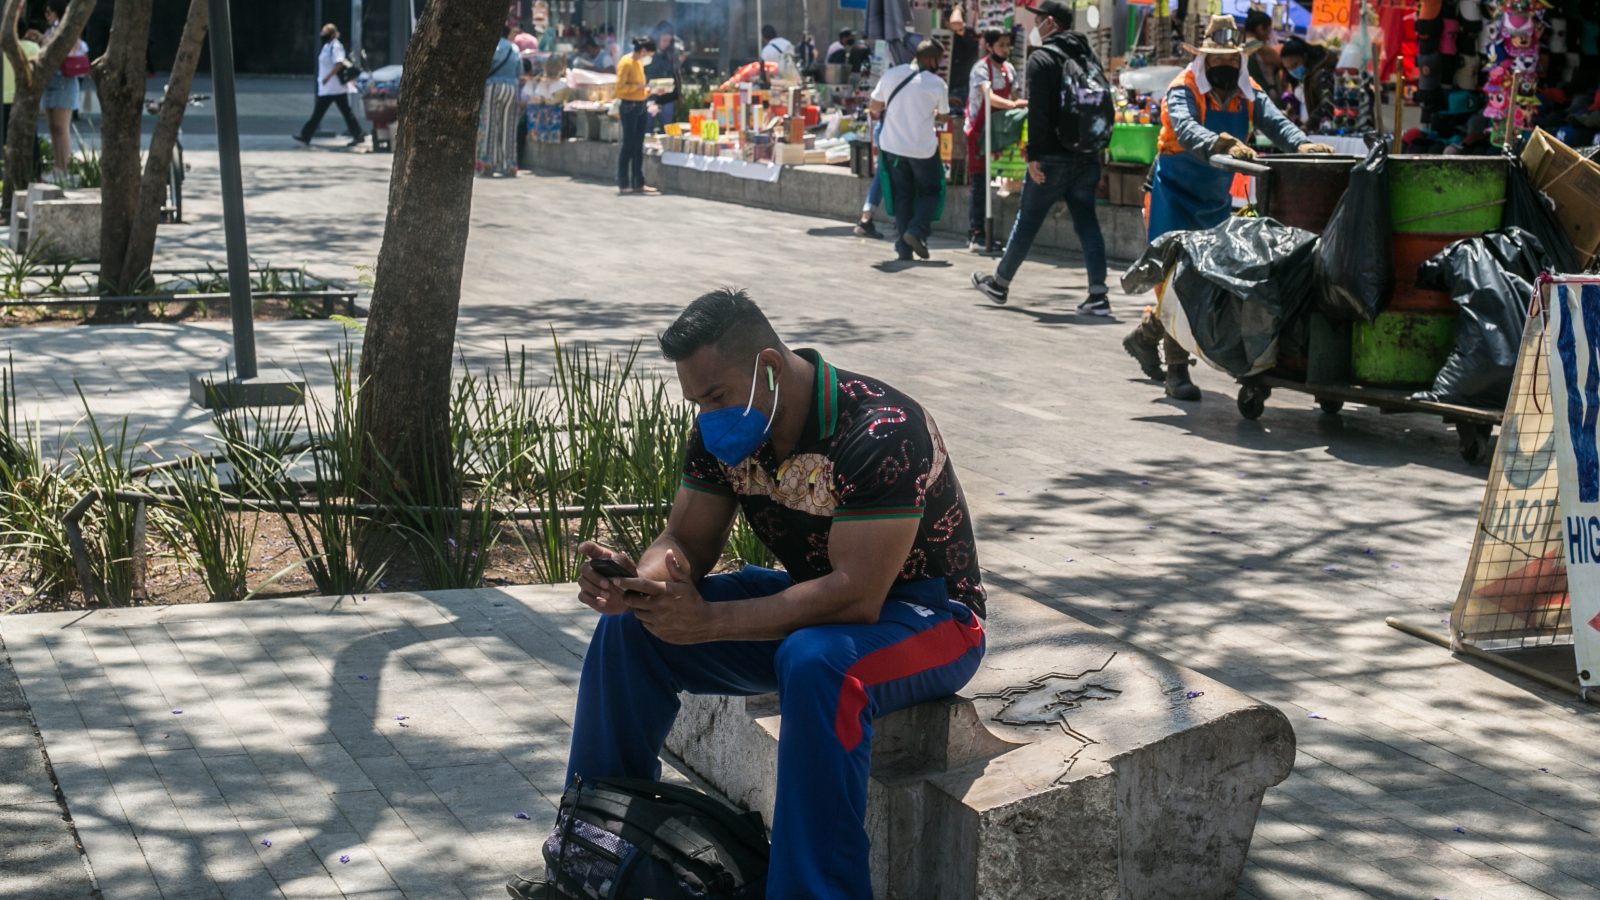 On March 12, Mexico’s Senate passed legislation requiring citizens to give up incredibly sensitive data in order to have access to a mobile phone. I